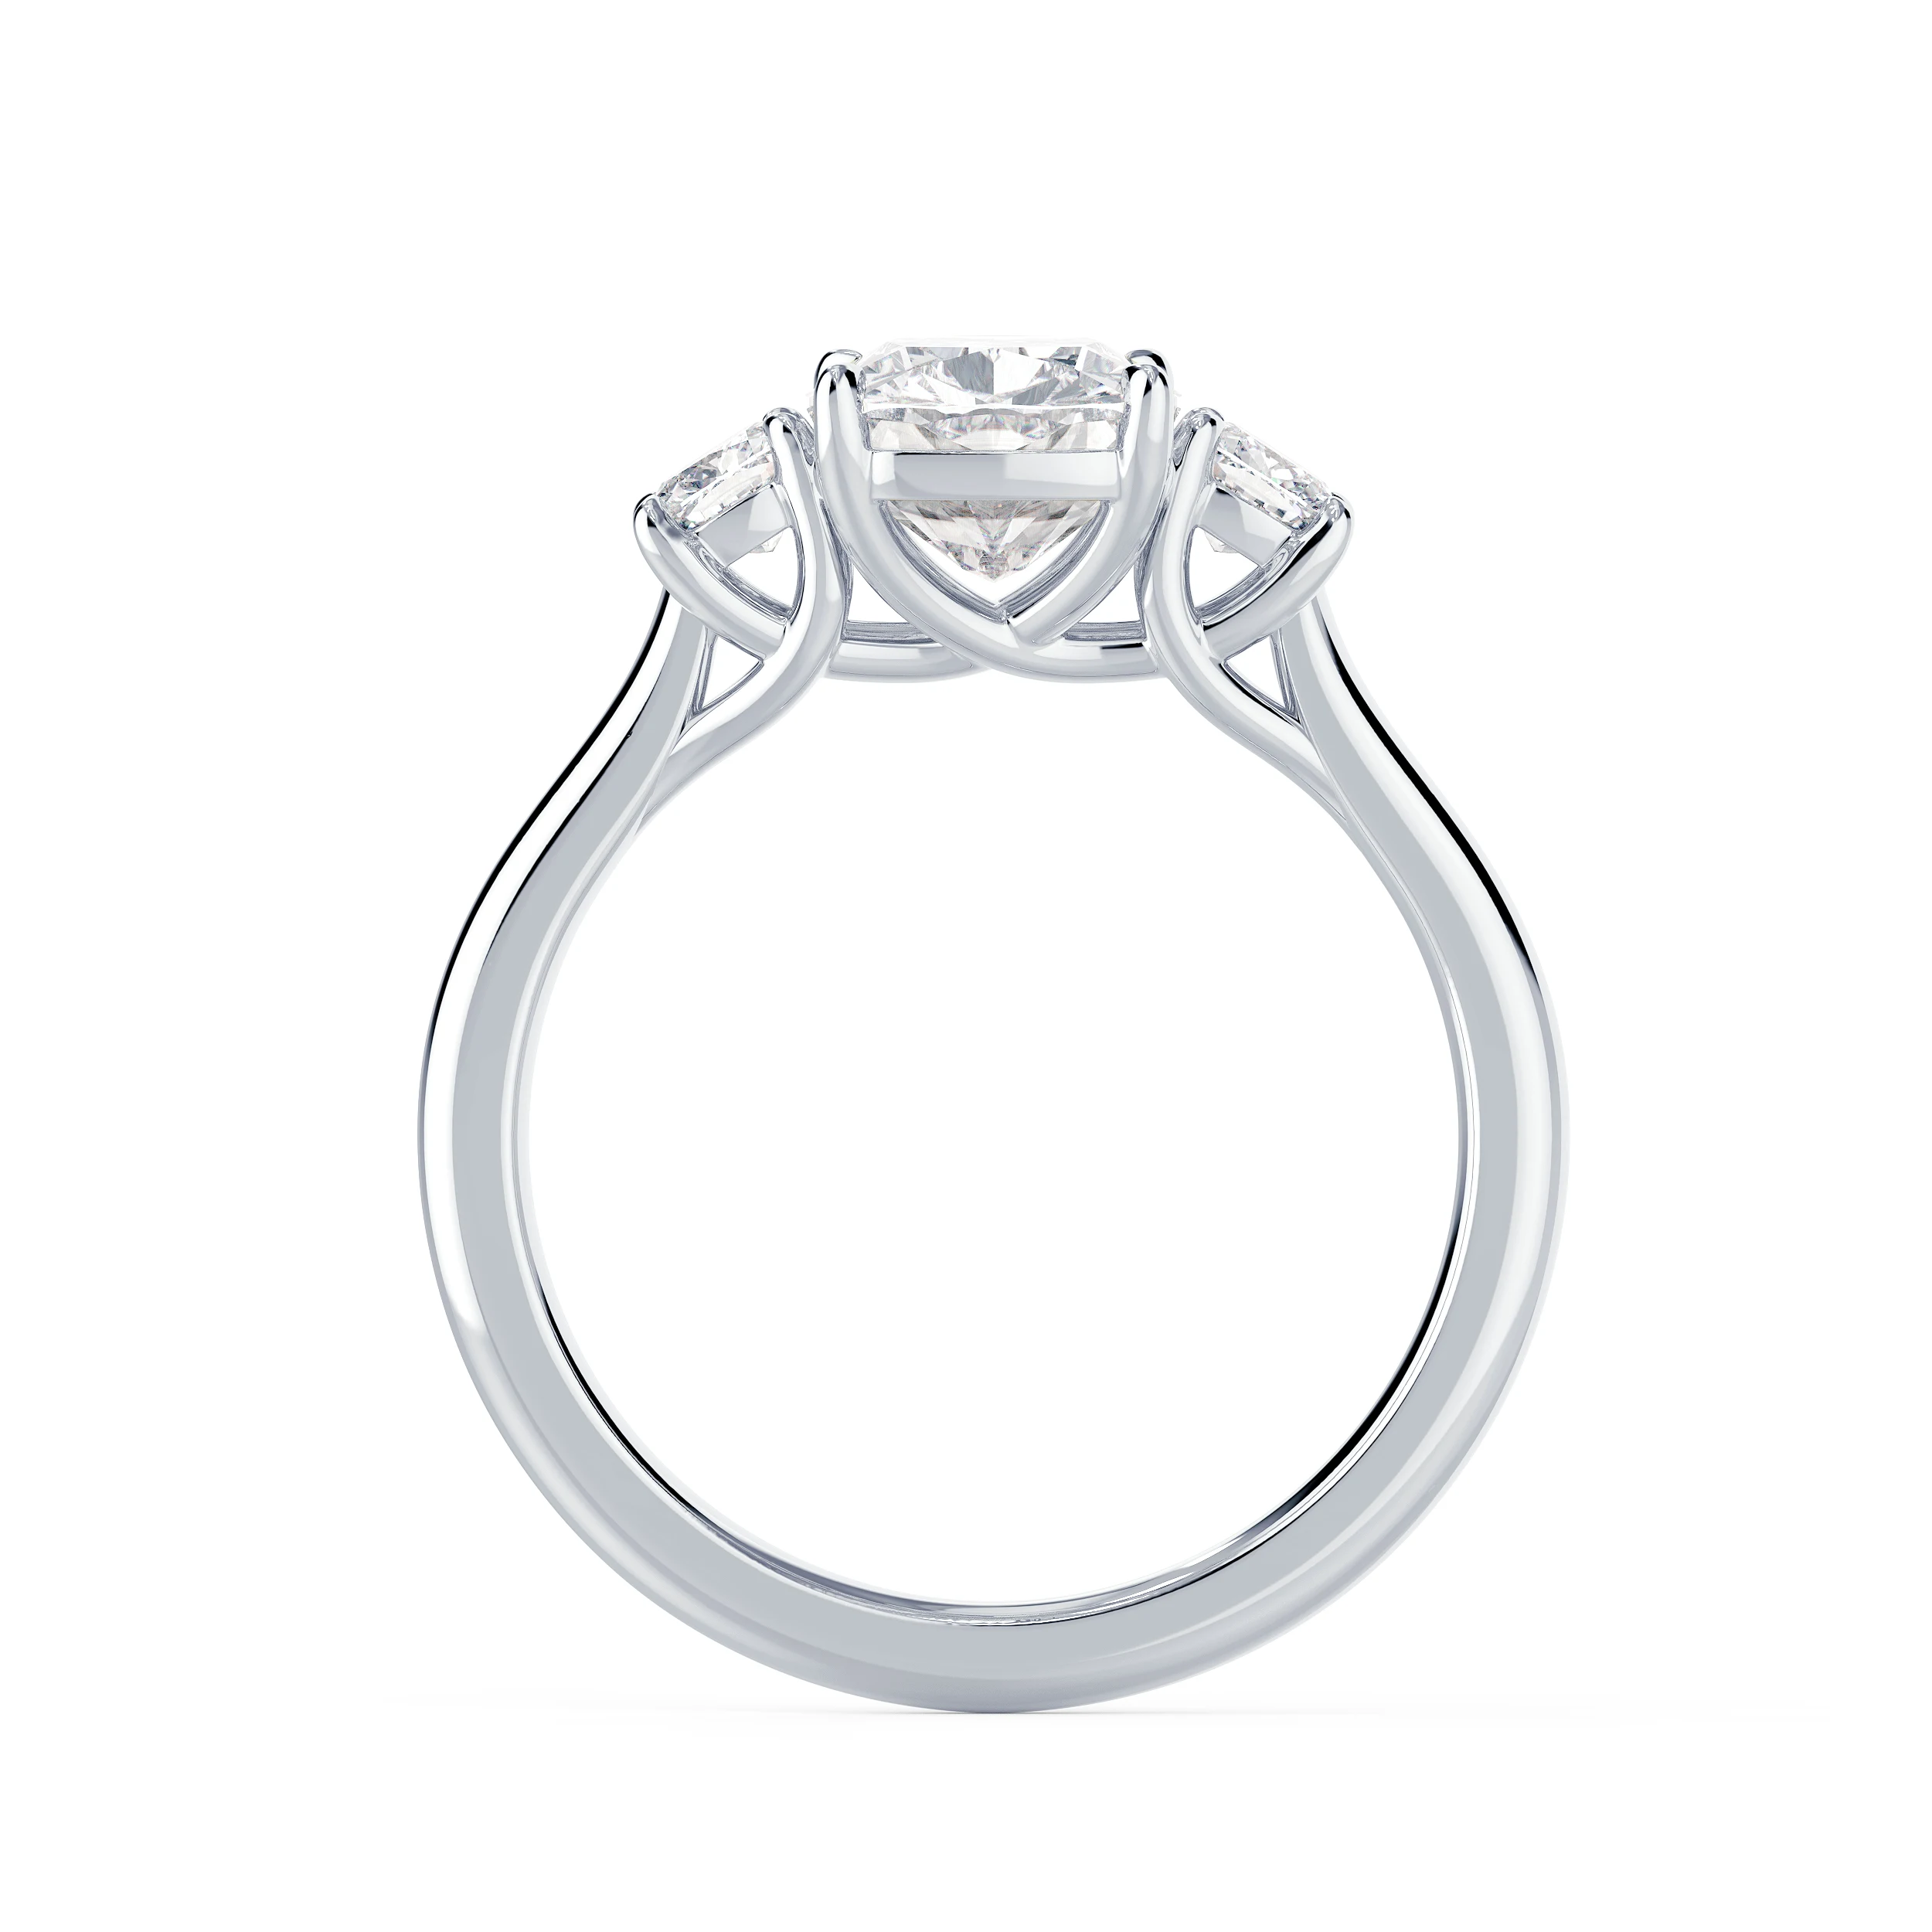 White Gold Cushion Three Stone Setting featuring Hand Selected 2.0 Carat Diamonds (Profile View)